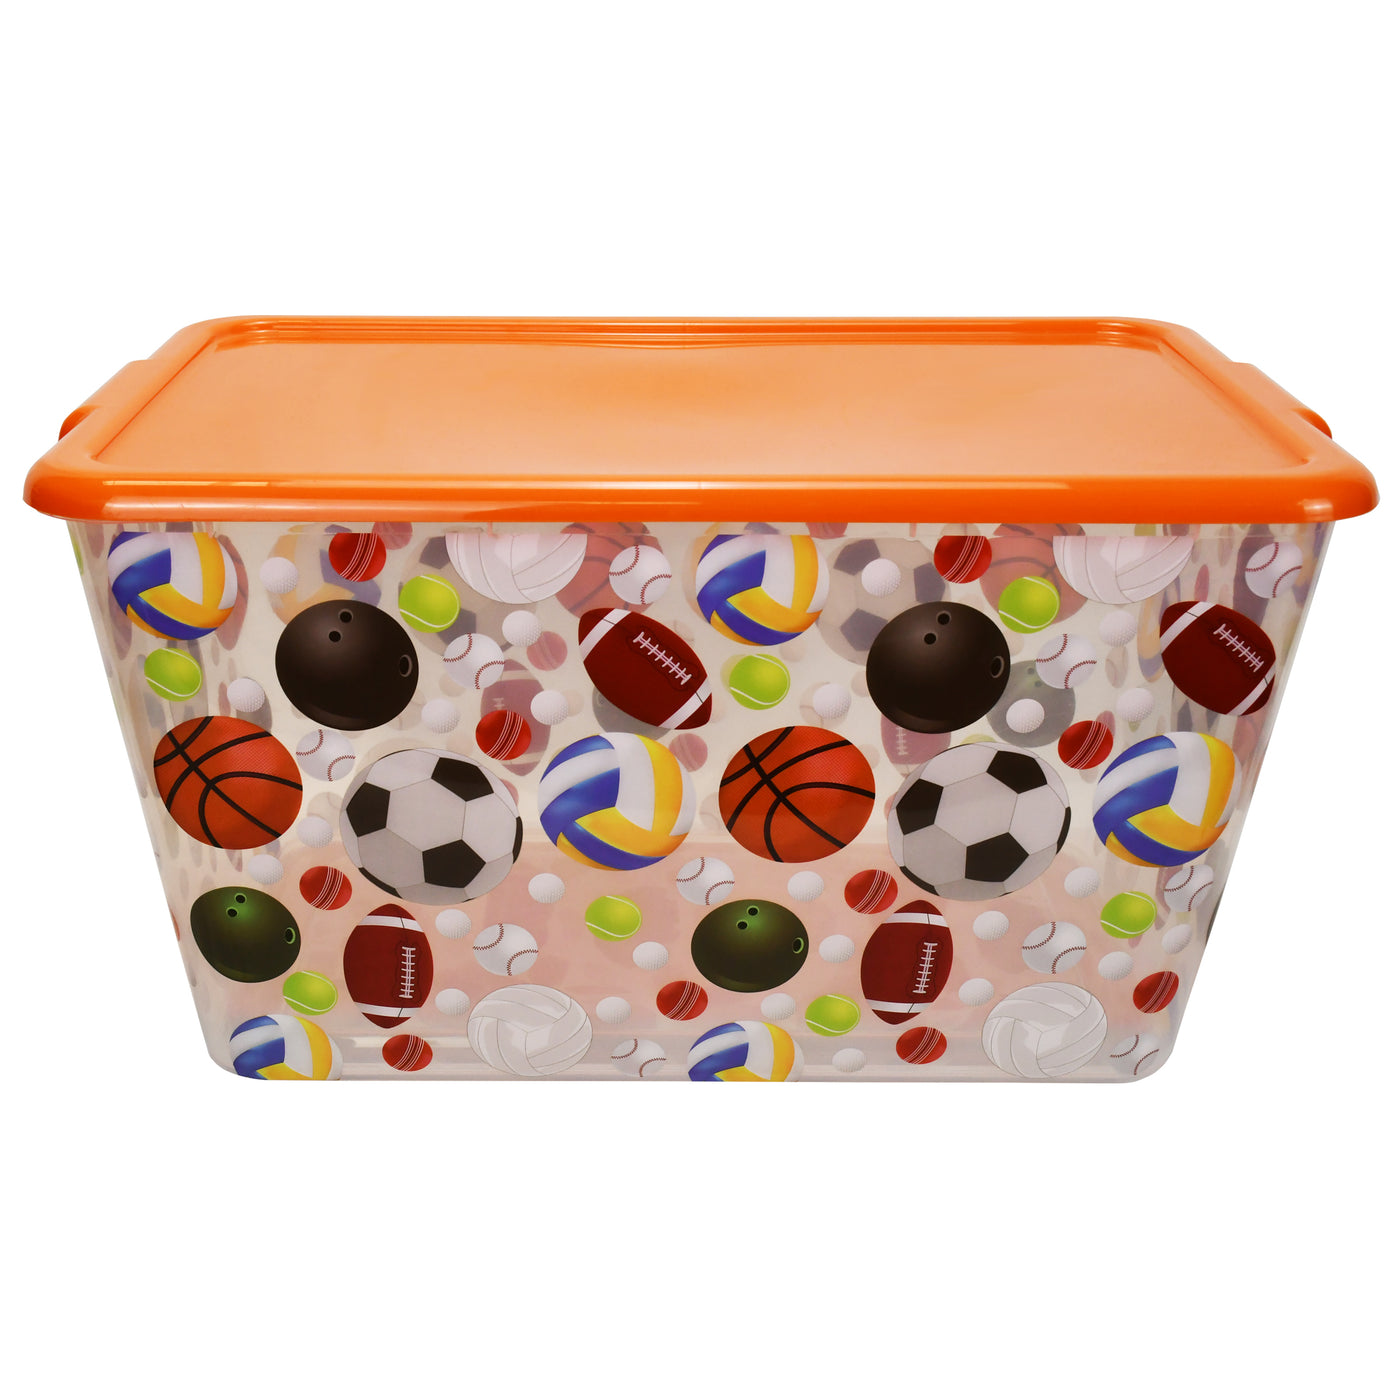 Transparent Storage Container Bins with Lid, Colorful Design Options (Pack of 4)